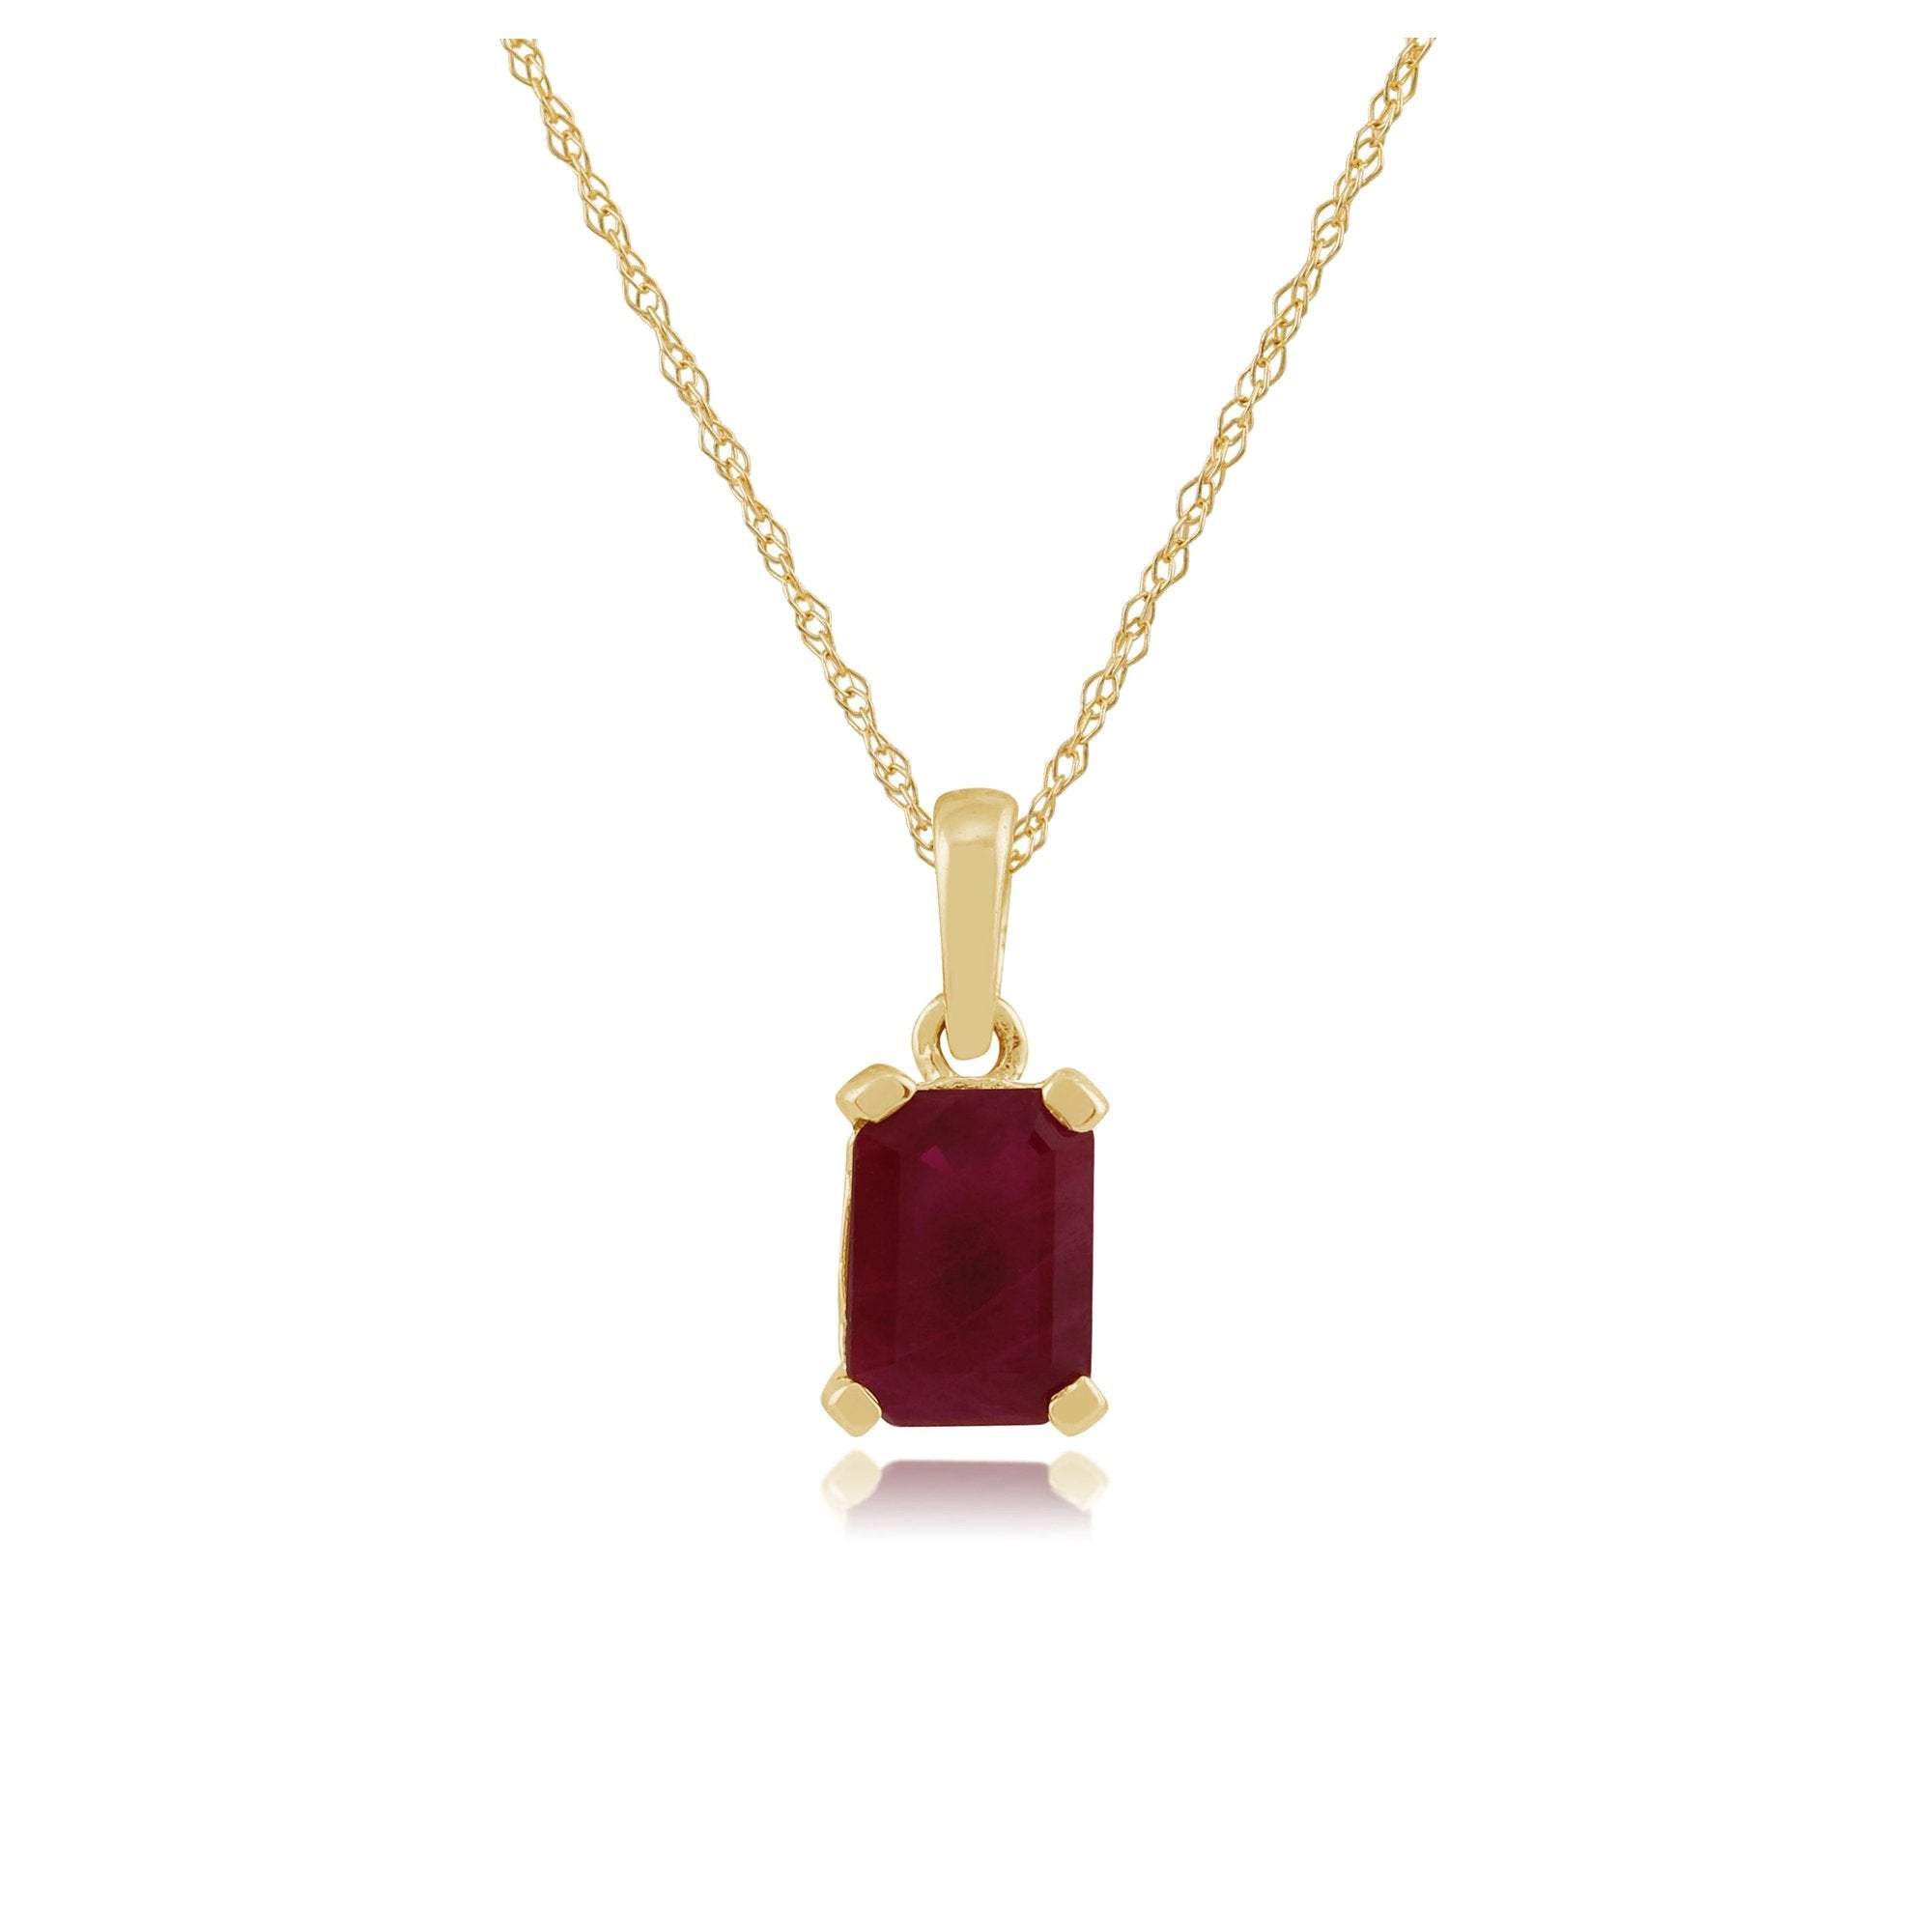 Ckassic Ruby Baguette Pendant In 9ct Gold